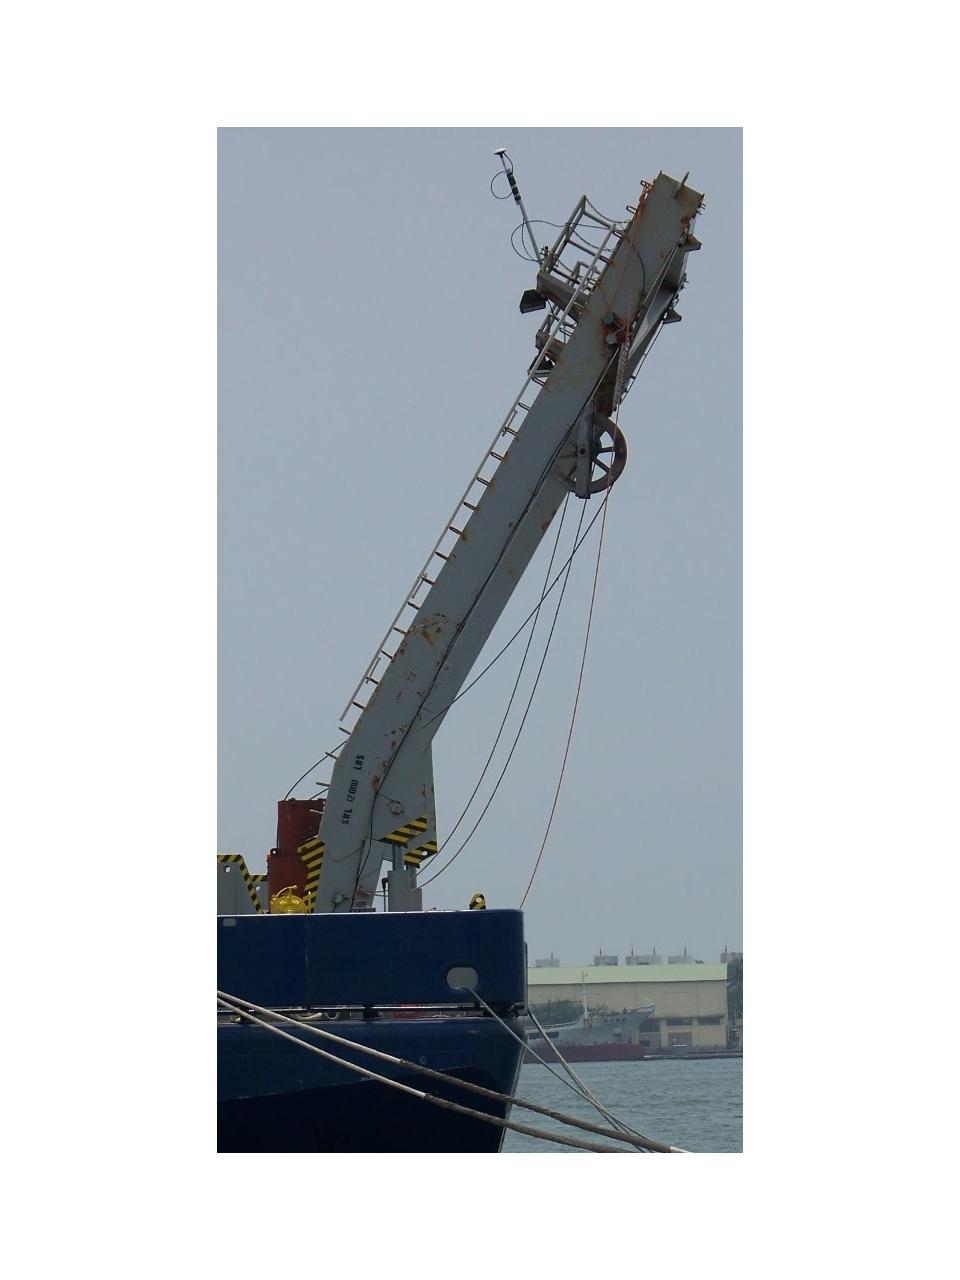 During the survey, the over-the-side transducer hangs off the transom, and therefore this position of the A-frame puts the antenna directly over the cable anchor point at the edge.